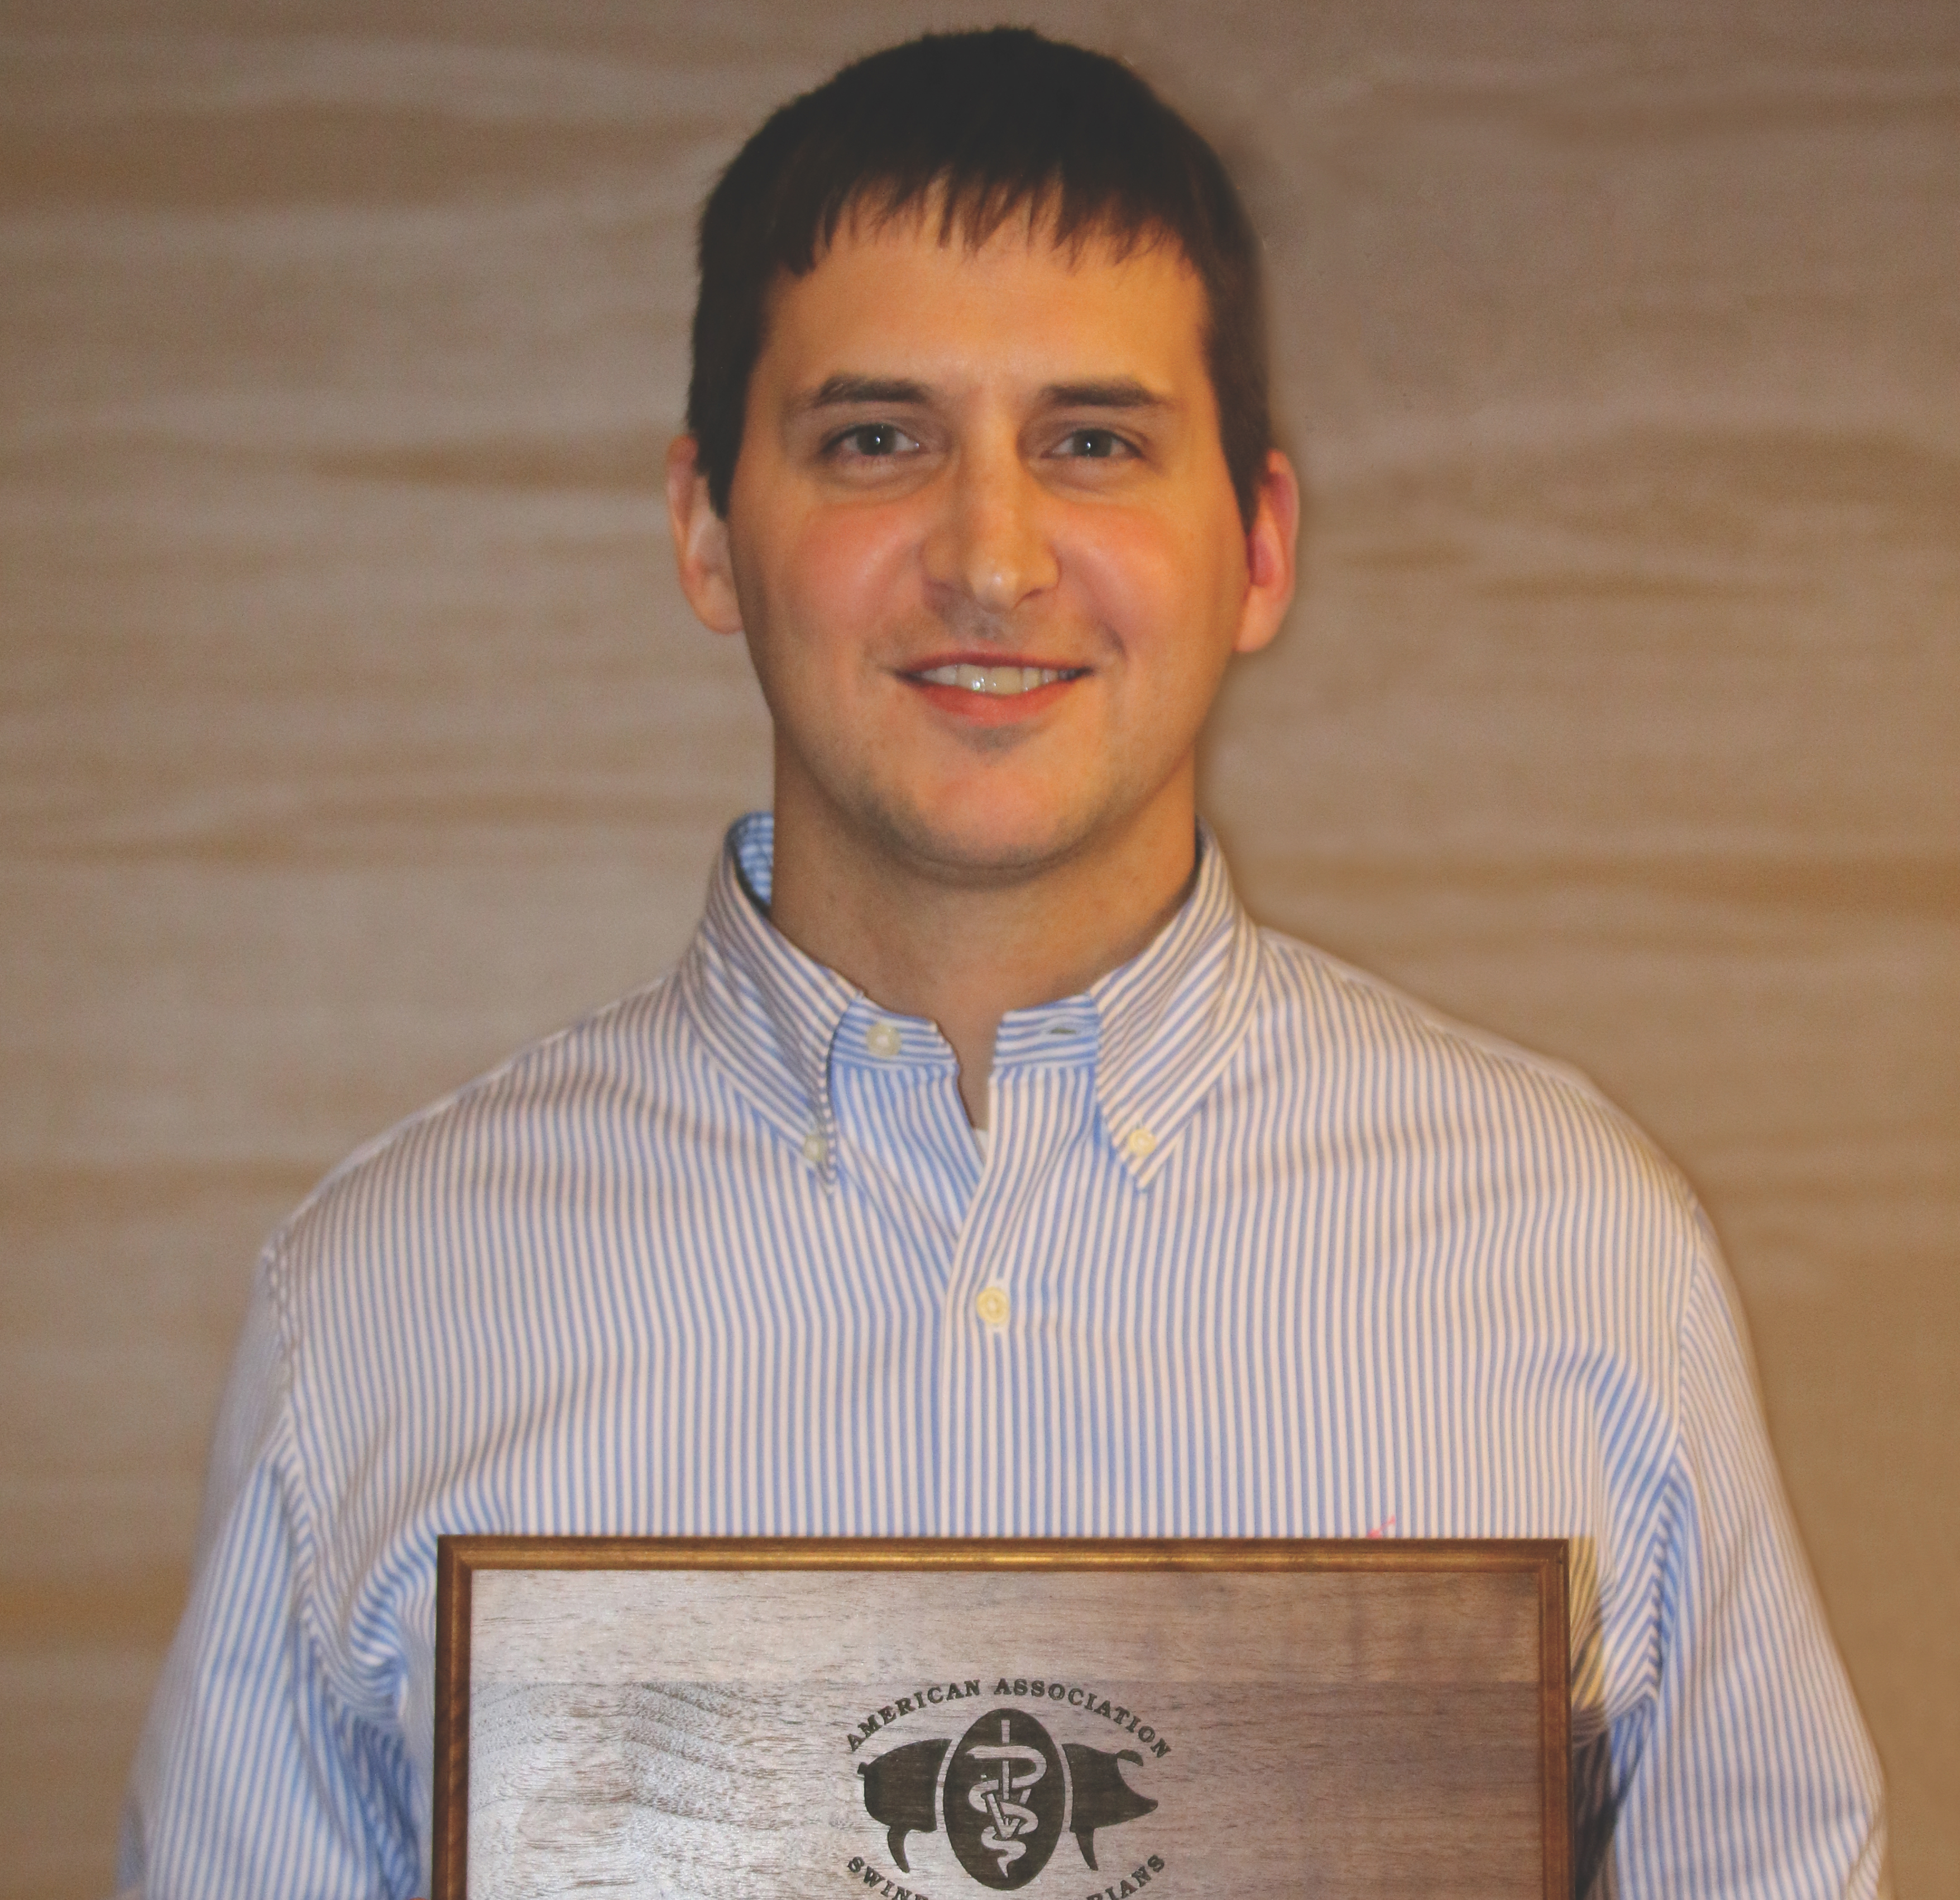 Dr. Ellingson receives the Young Swine Veterinarian of the Year Award